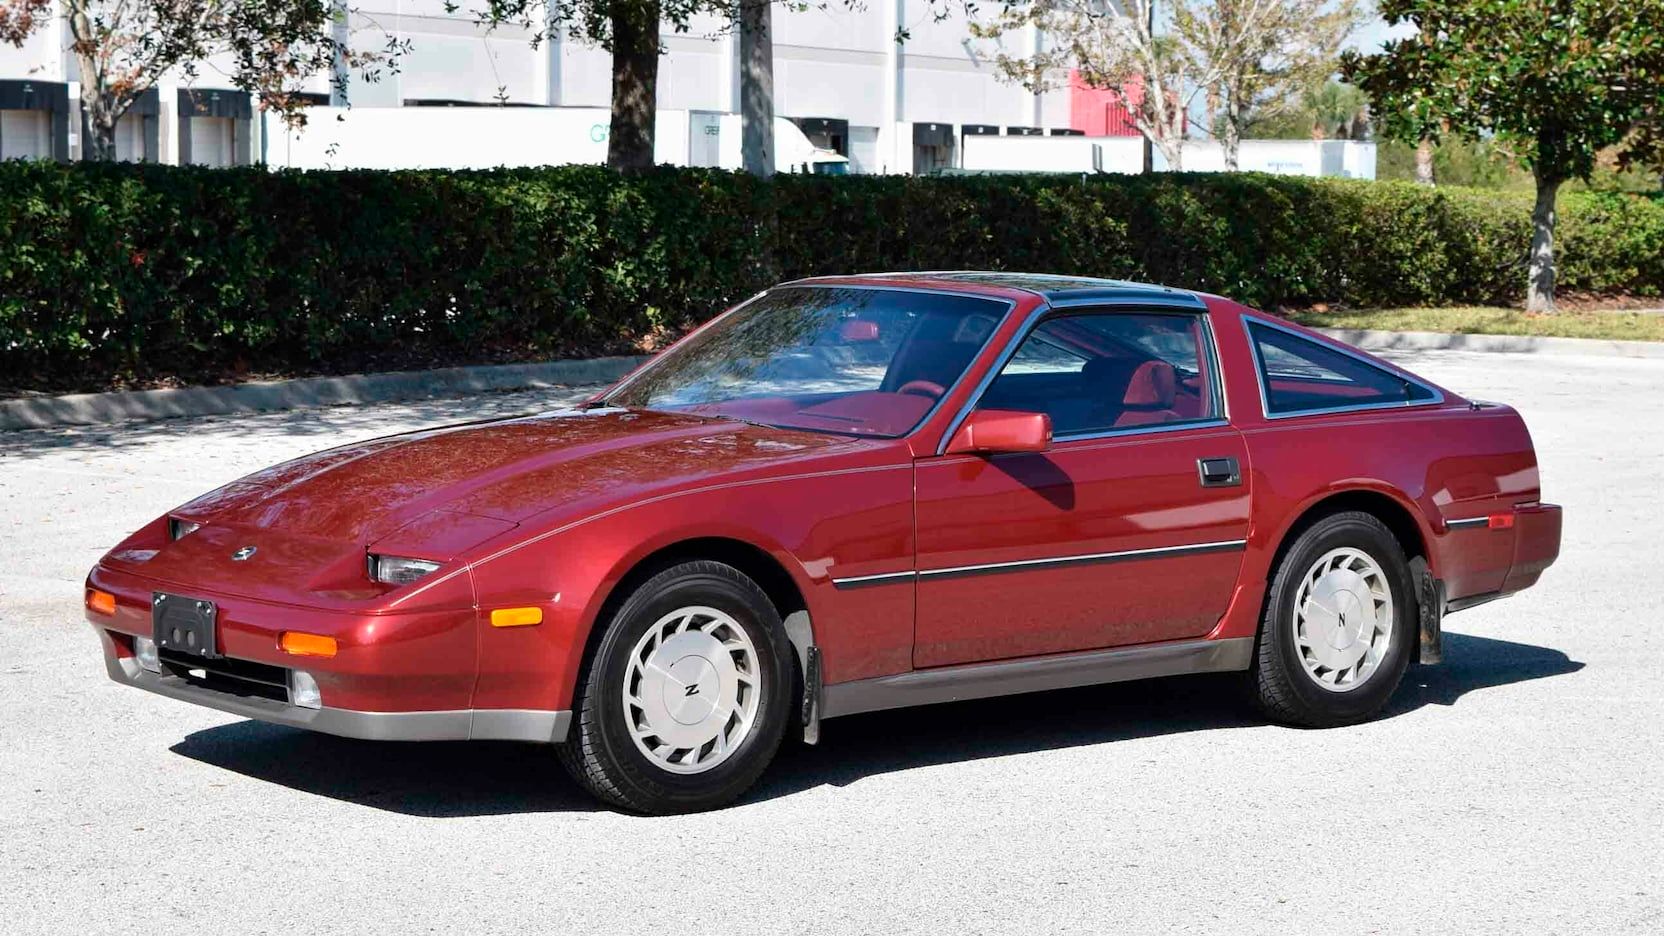 Red 1987 Nissan 300ZX Turbo parked